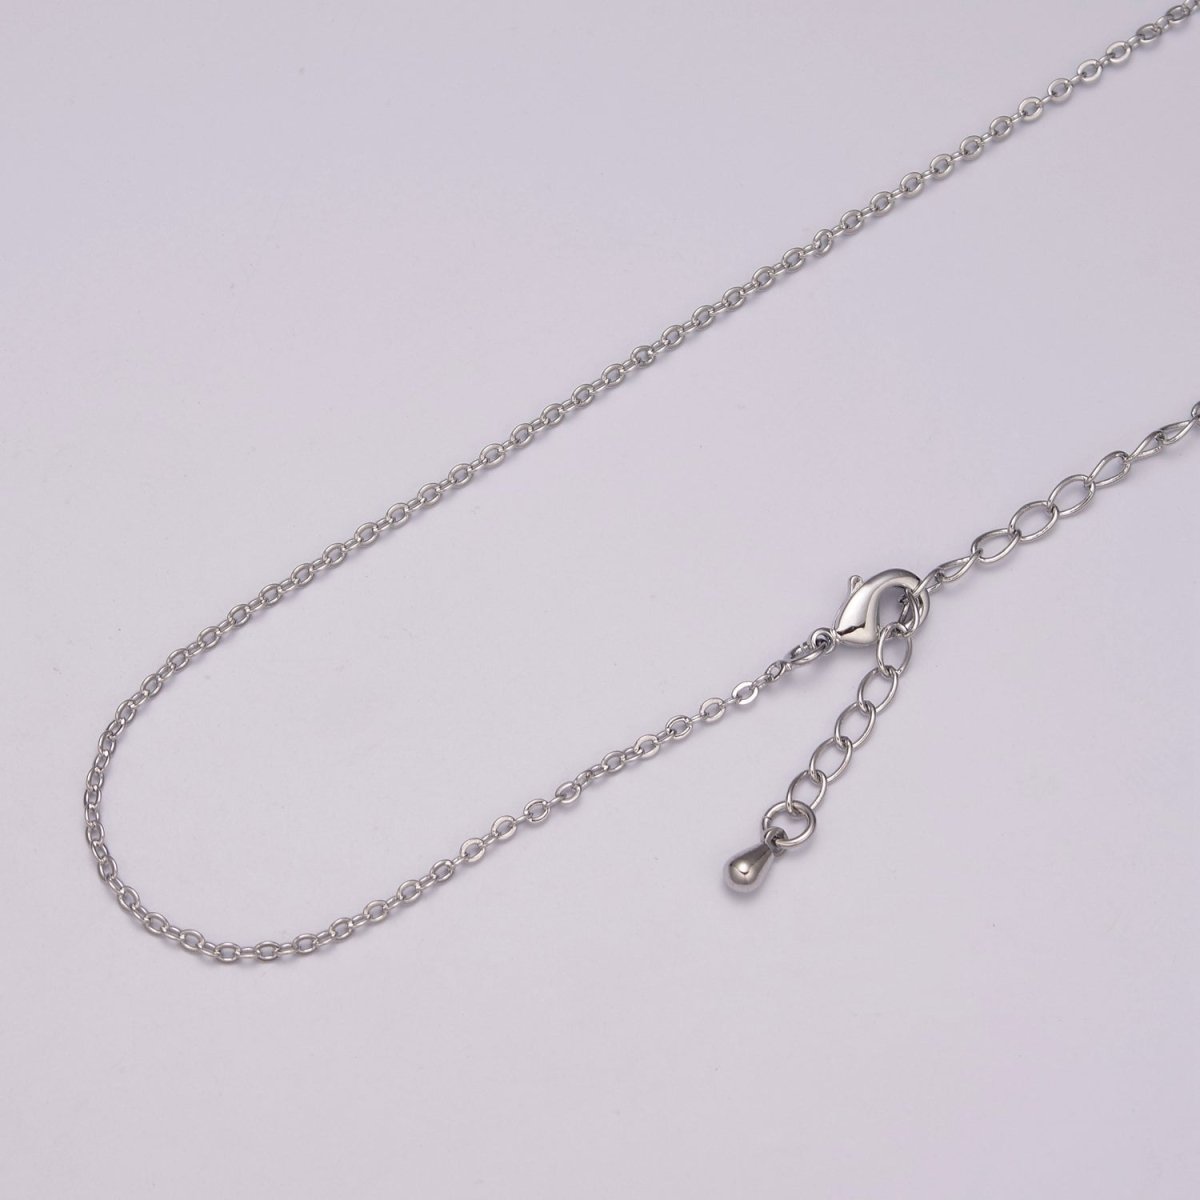 16K Gold Filled 1.5mm Dainty Minimalist Cable 18 Inch Layering Chain Necklace w. Extender in Gold & Silver | WA-438 WA-439 Clearance Pricing - DLUXCA